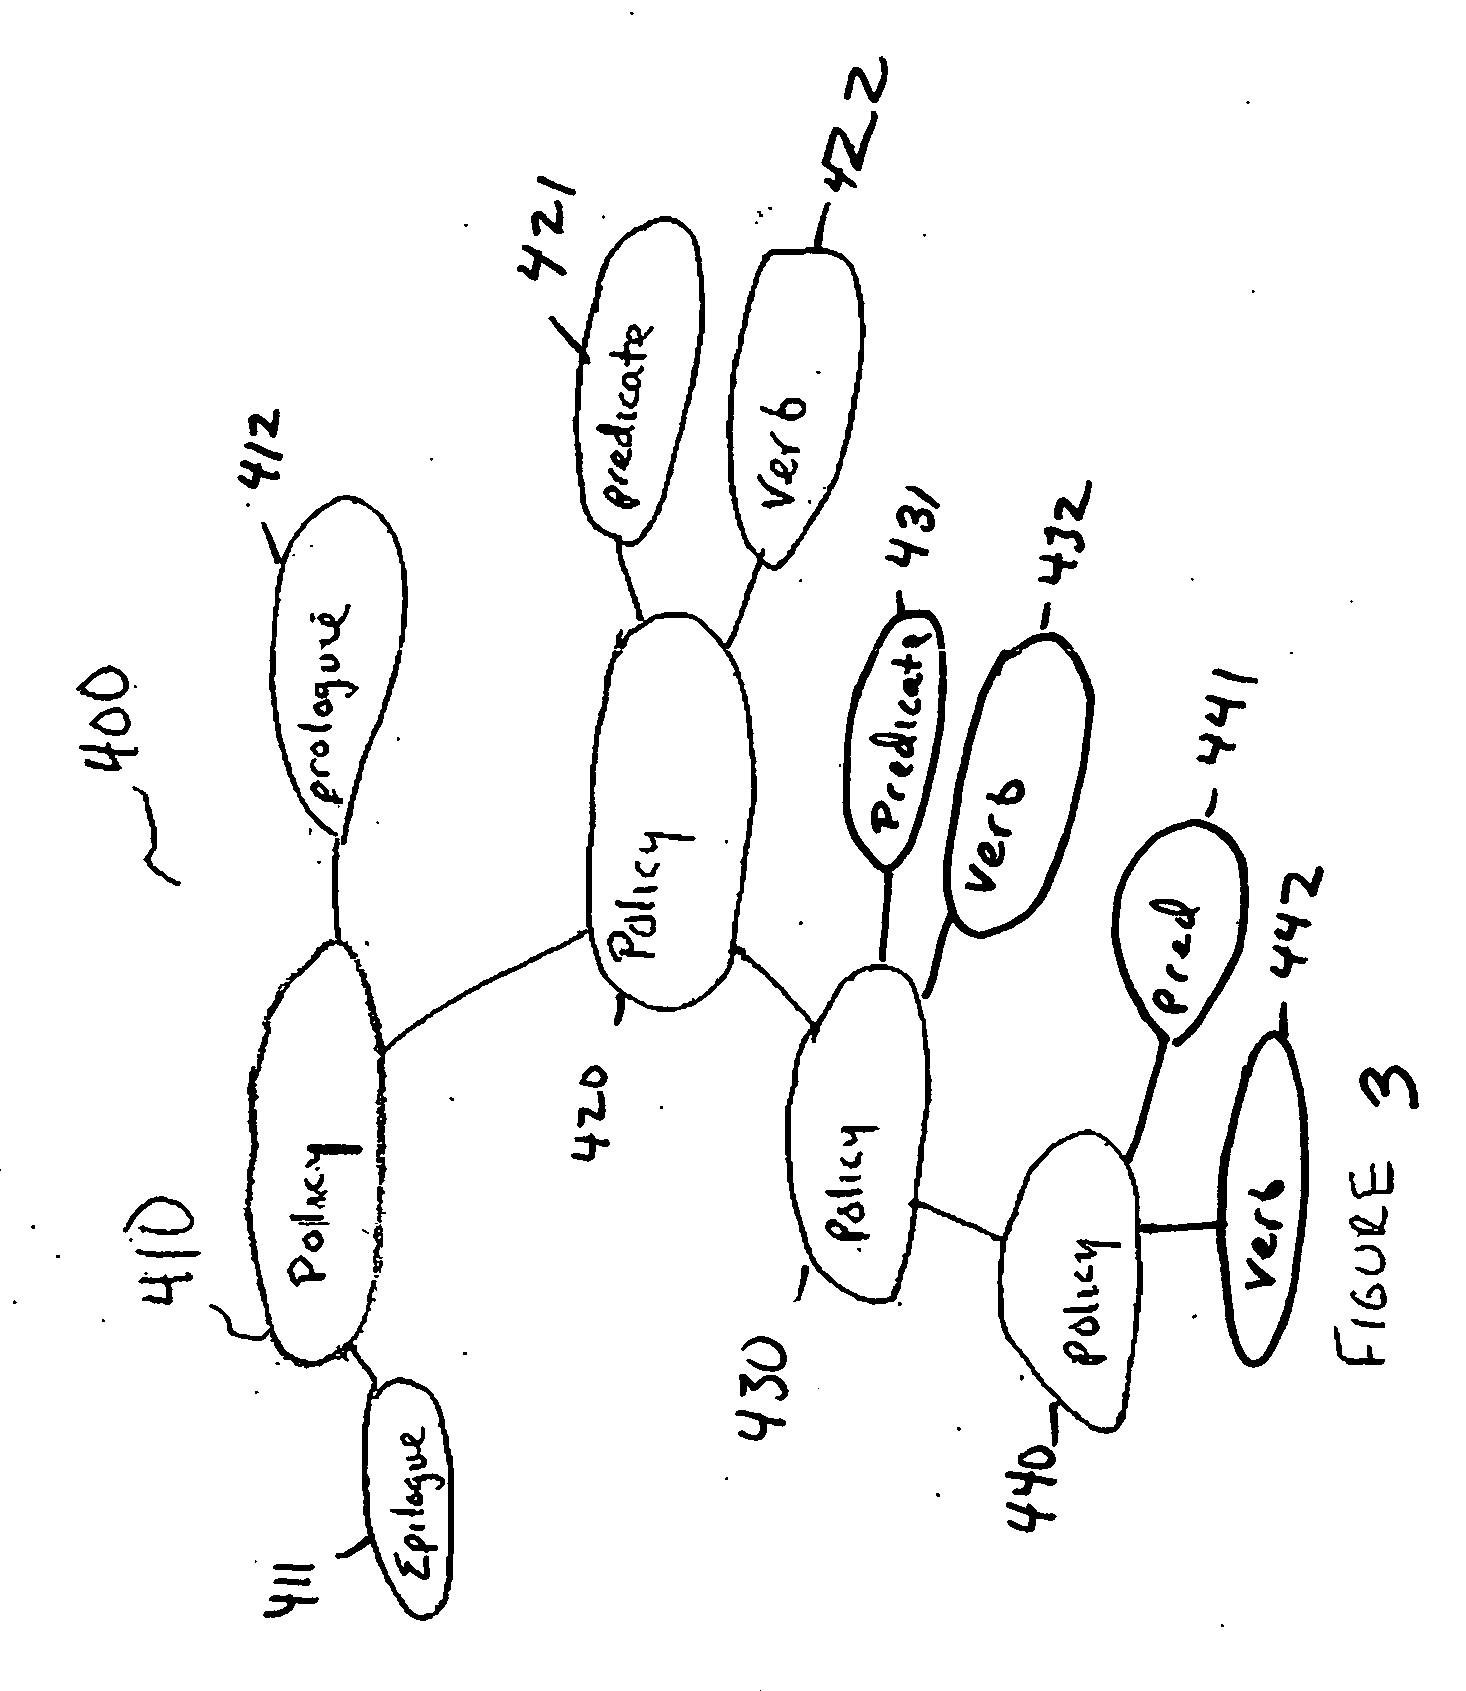 System and method for evaluating policies for network load balancing